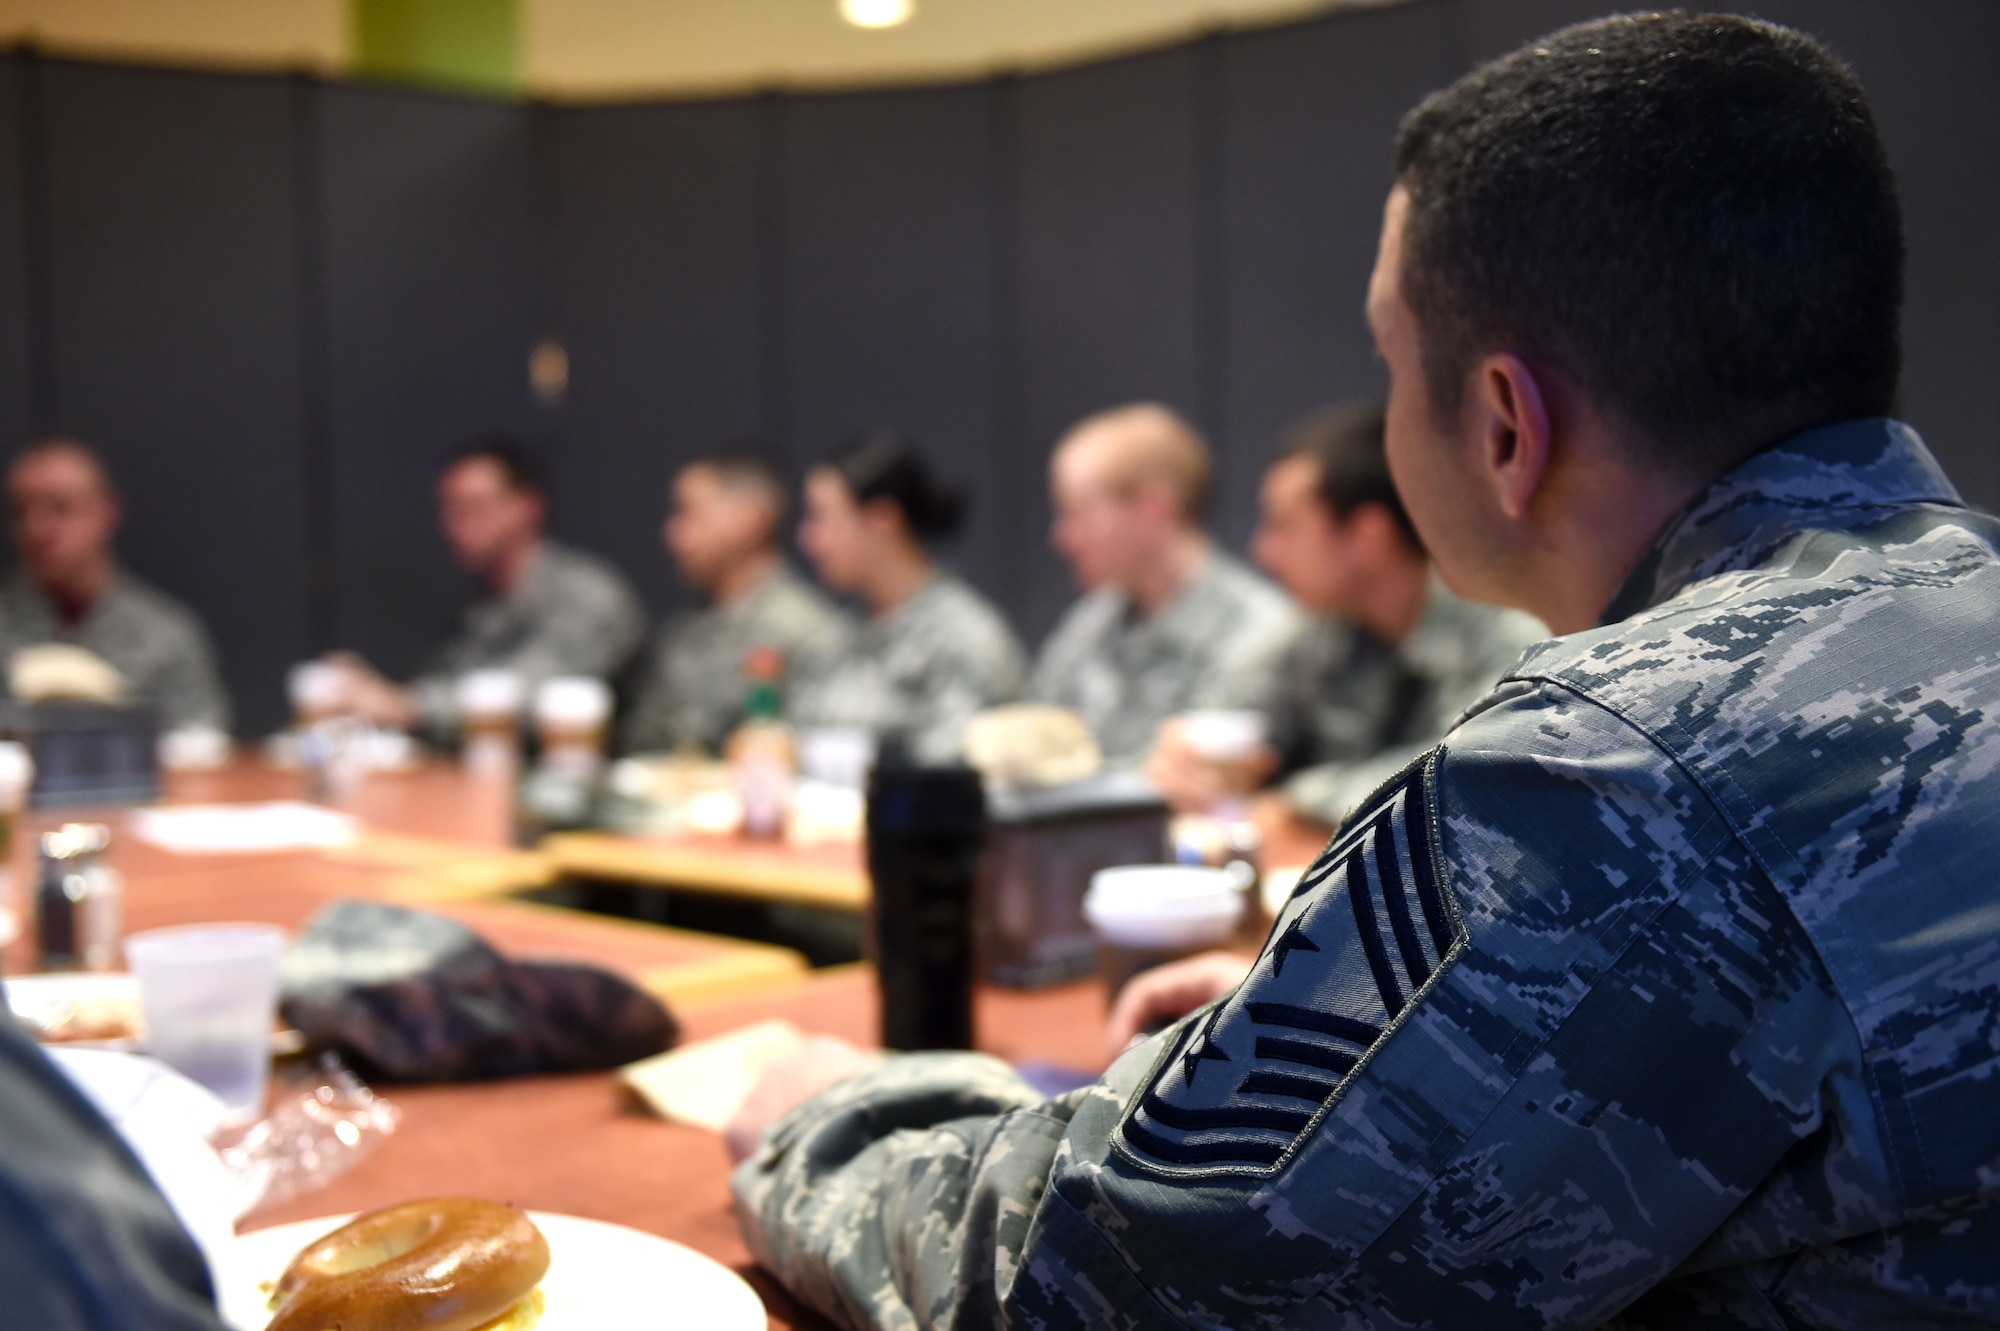 Chief Master Sgt. Brian Kruzelnick, 460th Space Wing command chief, center, listens to Airmen during a breakfast with Airmen and the 460th SW commander, Col. John Wagner, Jan. 9, 2015, at the Panther Den on Buckley Air Force Base, Colo. During the breakfast, leadership sought out Airmen’s thoughts and opinions on what they could do to make Buckley the best base in the Air Force. (U.S. Air Force photo by Airman 1st Class Emily E. Amyotte/Released)